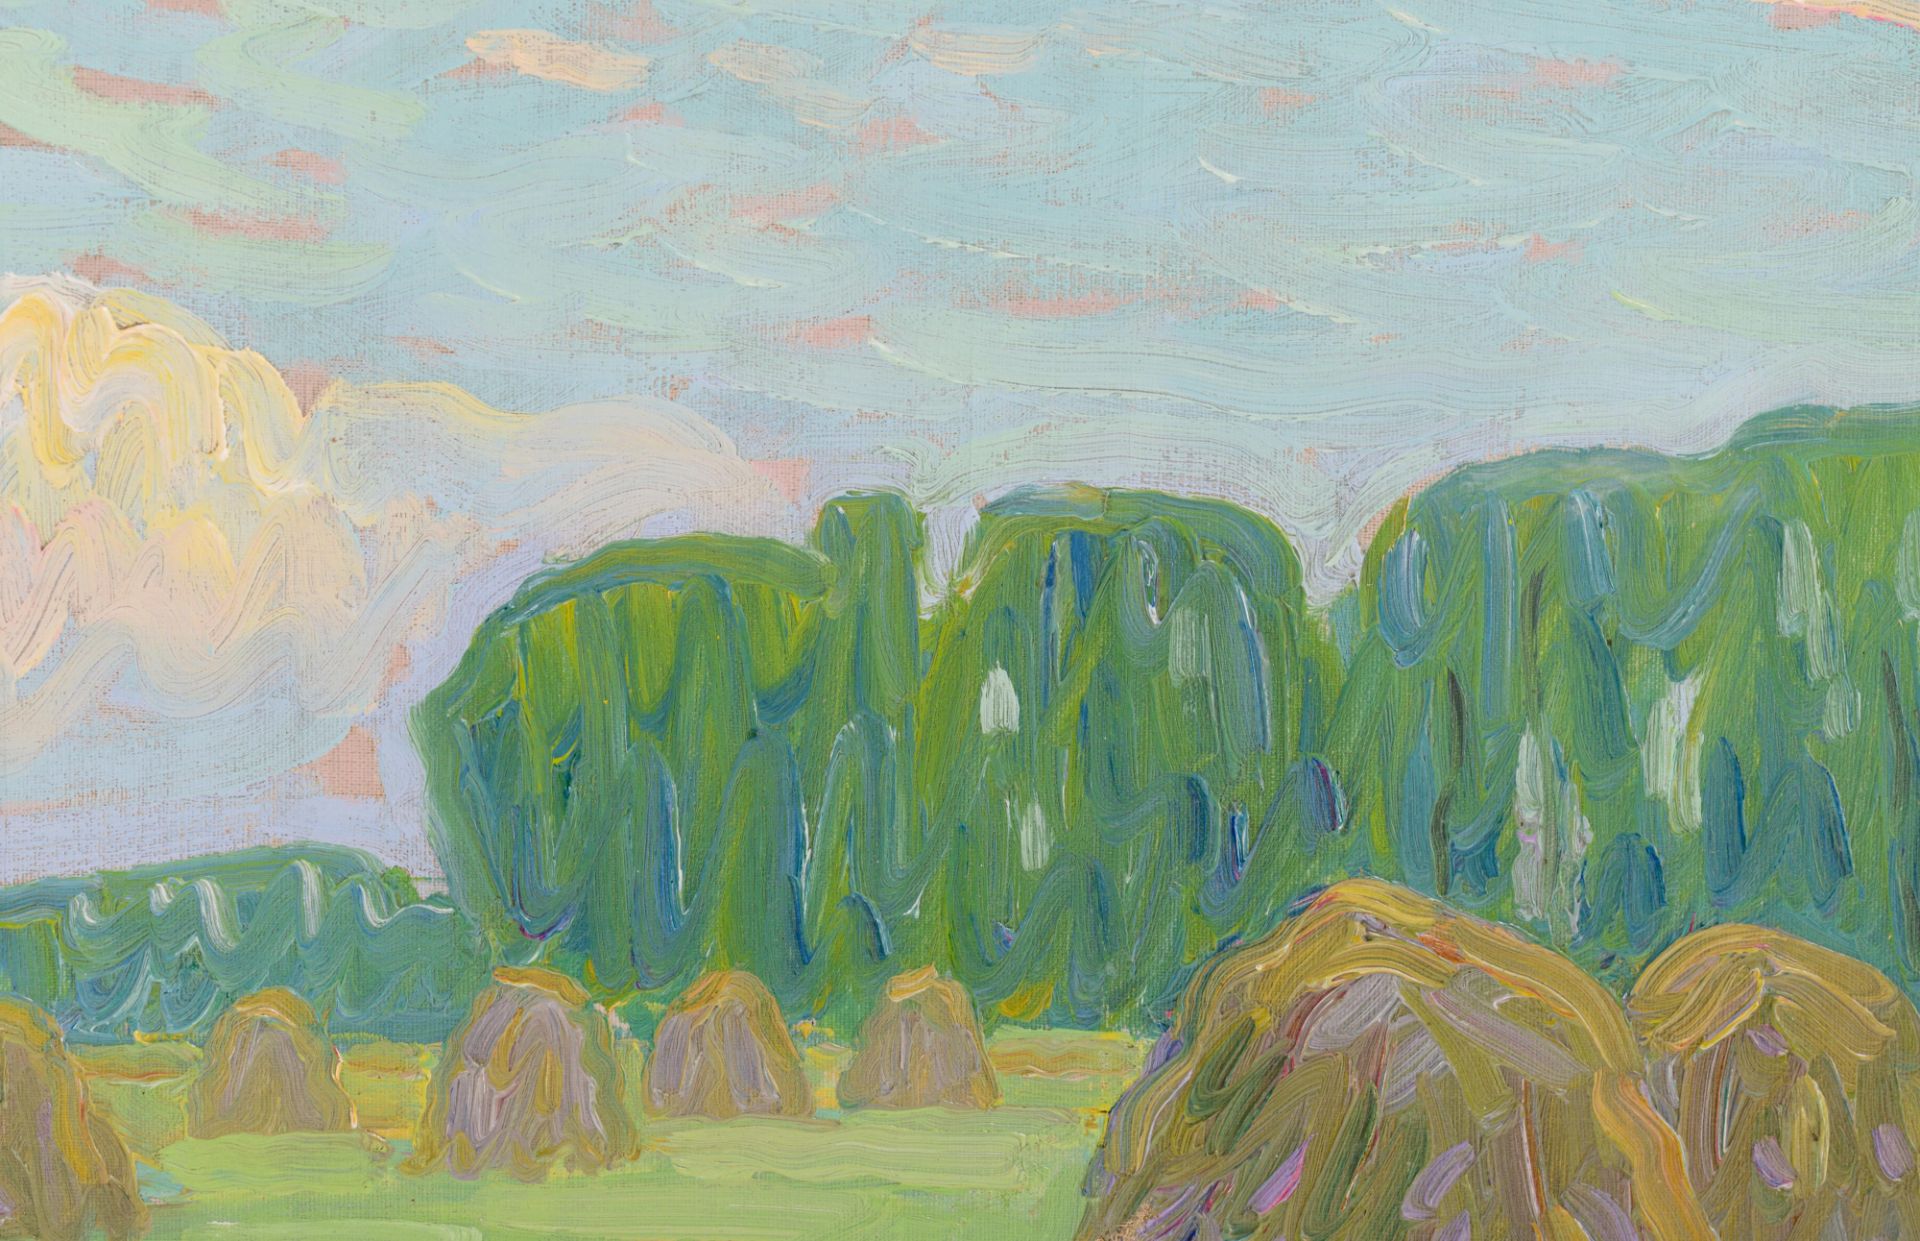 Horenbant J., the laundry tub, oil on canvas, 34 x 45 cm. Added: Montobio G., the haystacks in summe - Image 10 of 12